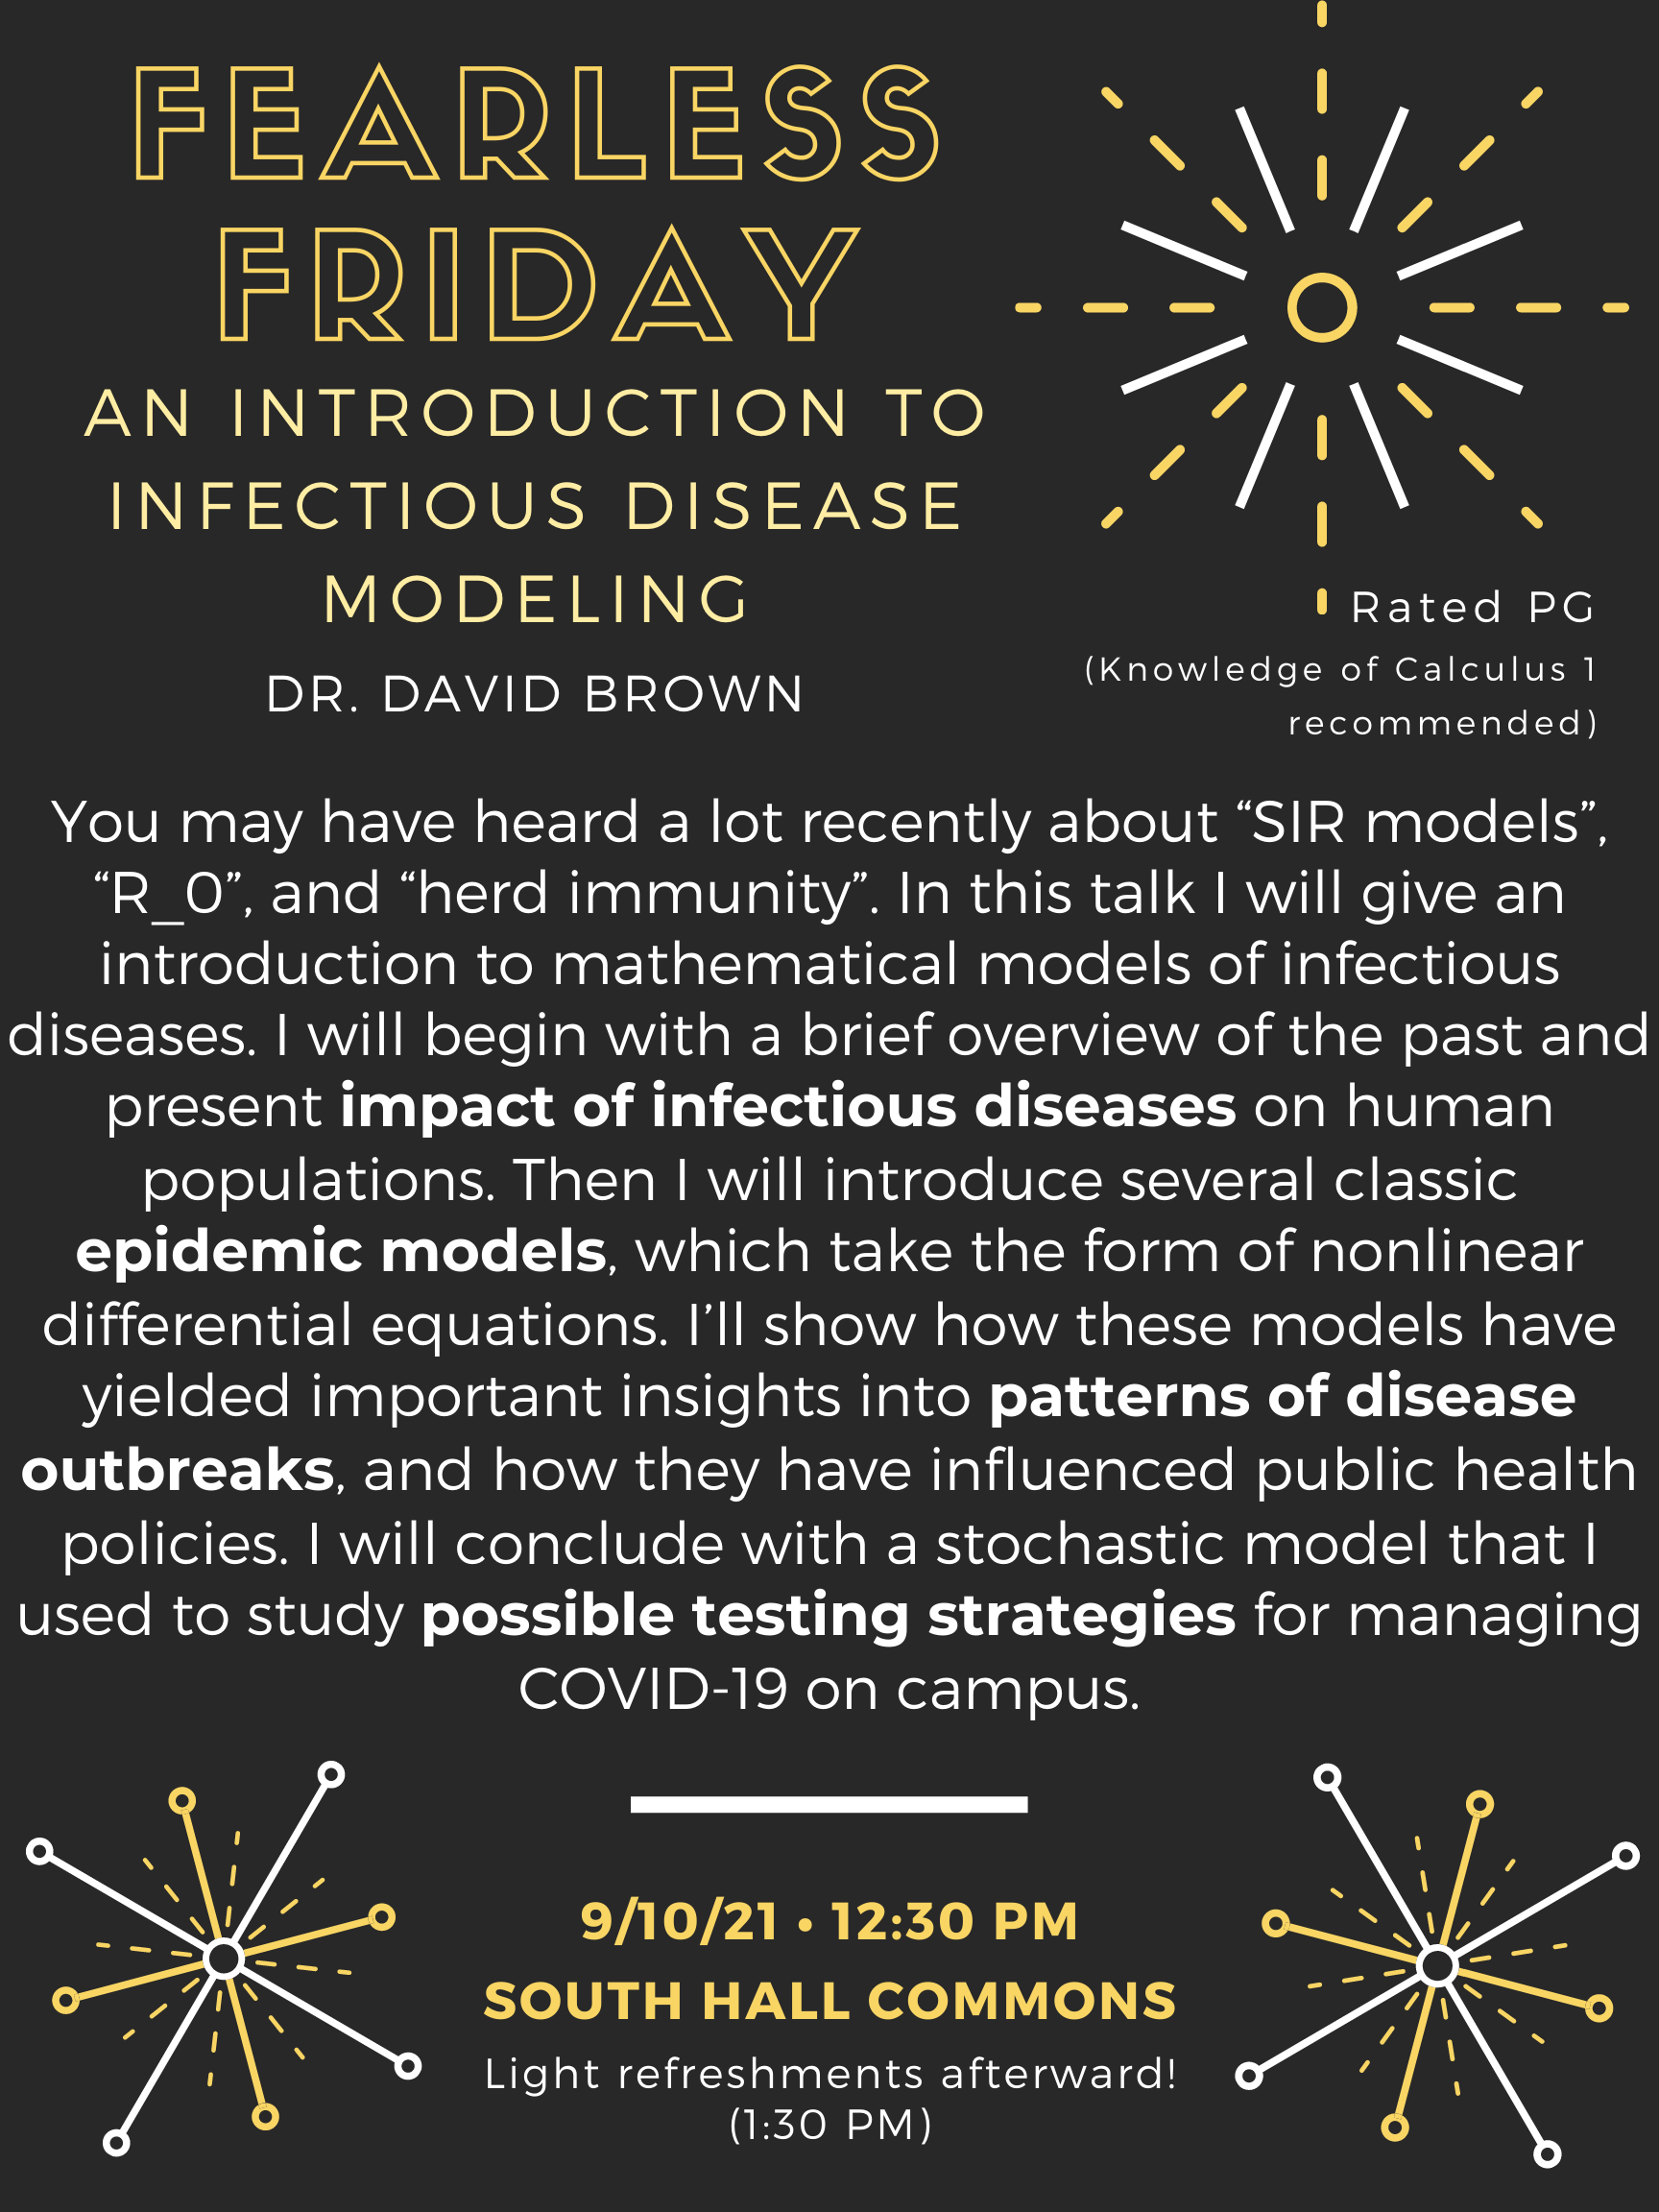 Fearless-Friday-B1-F2---An-Introduction-to-Infectious-Disease-Modeling-Brown.png